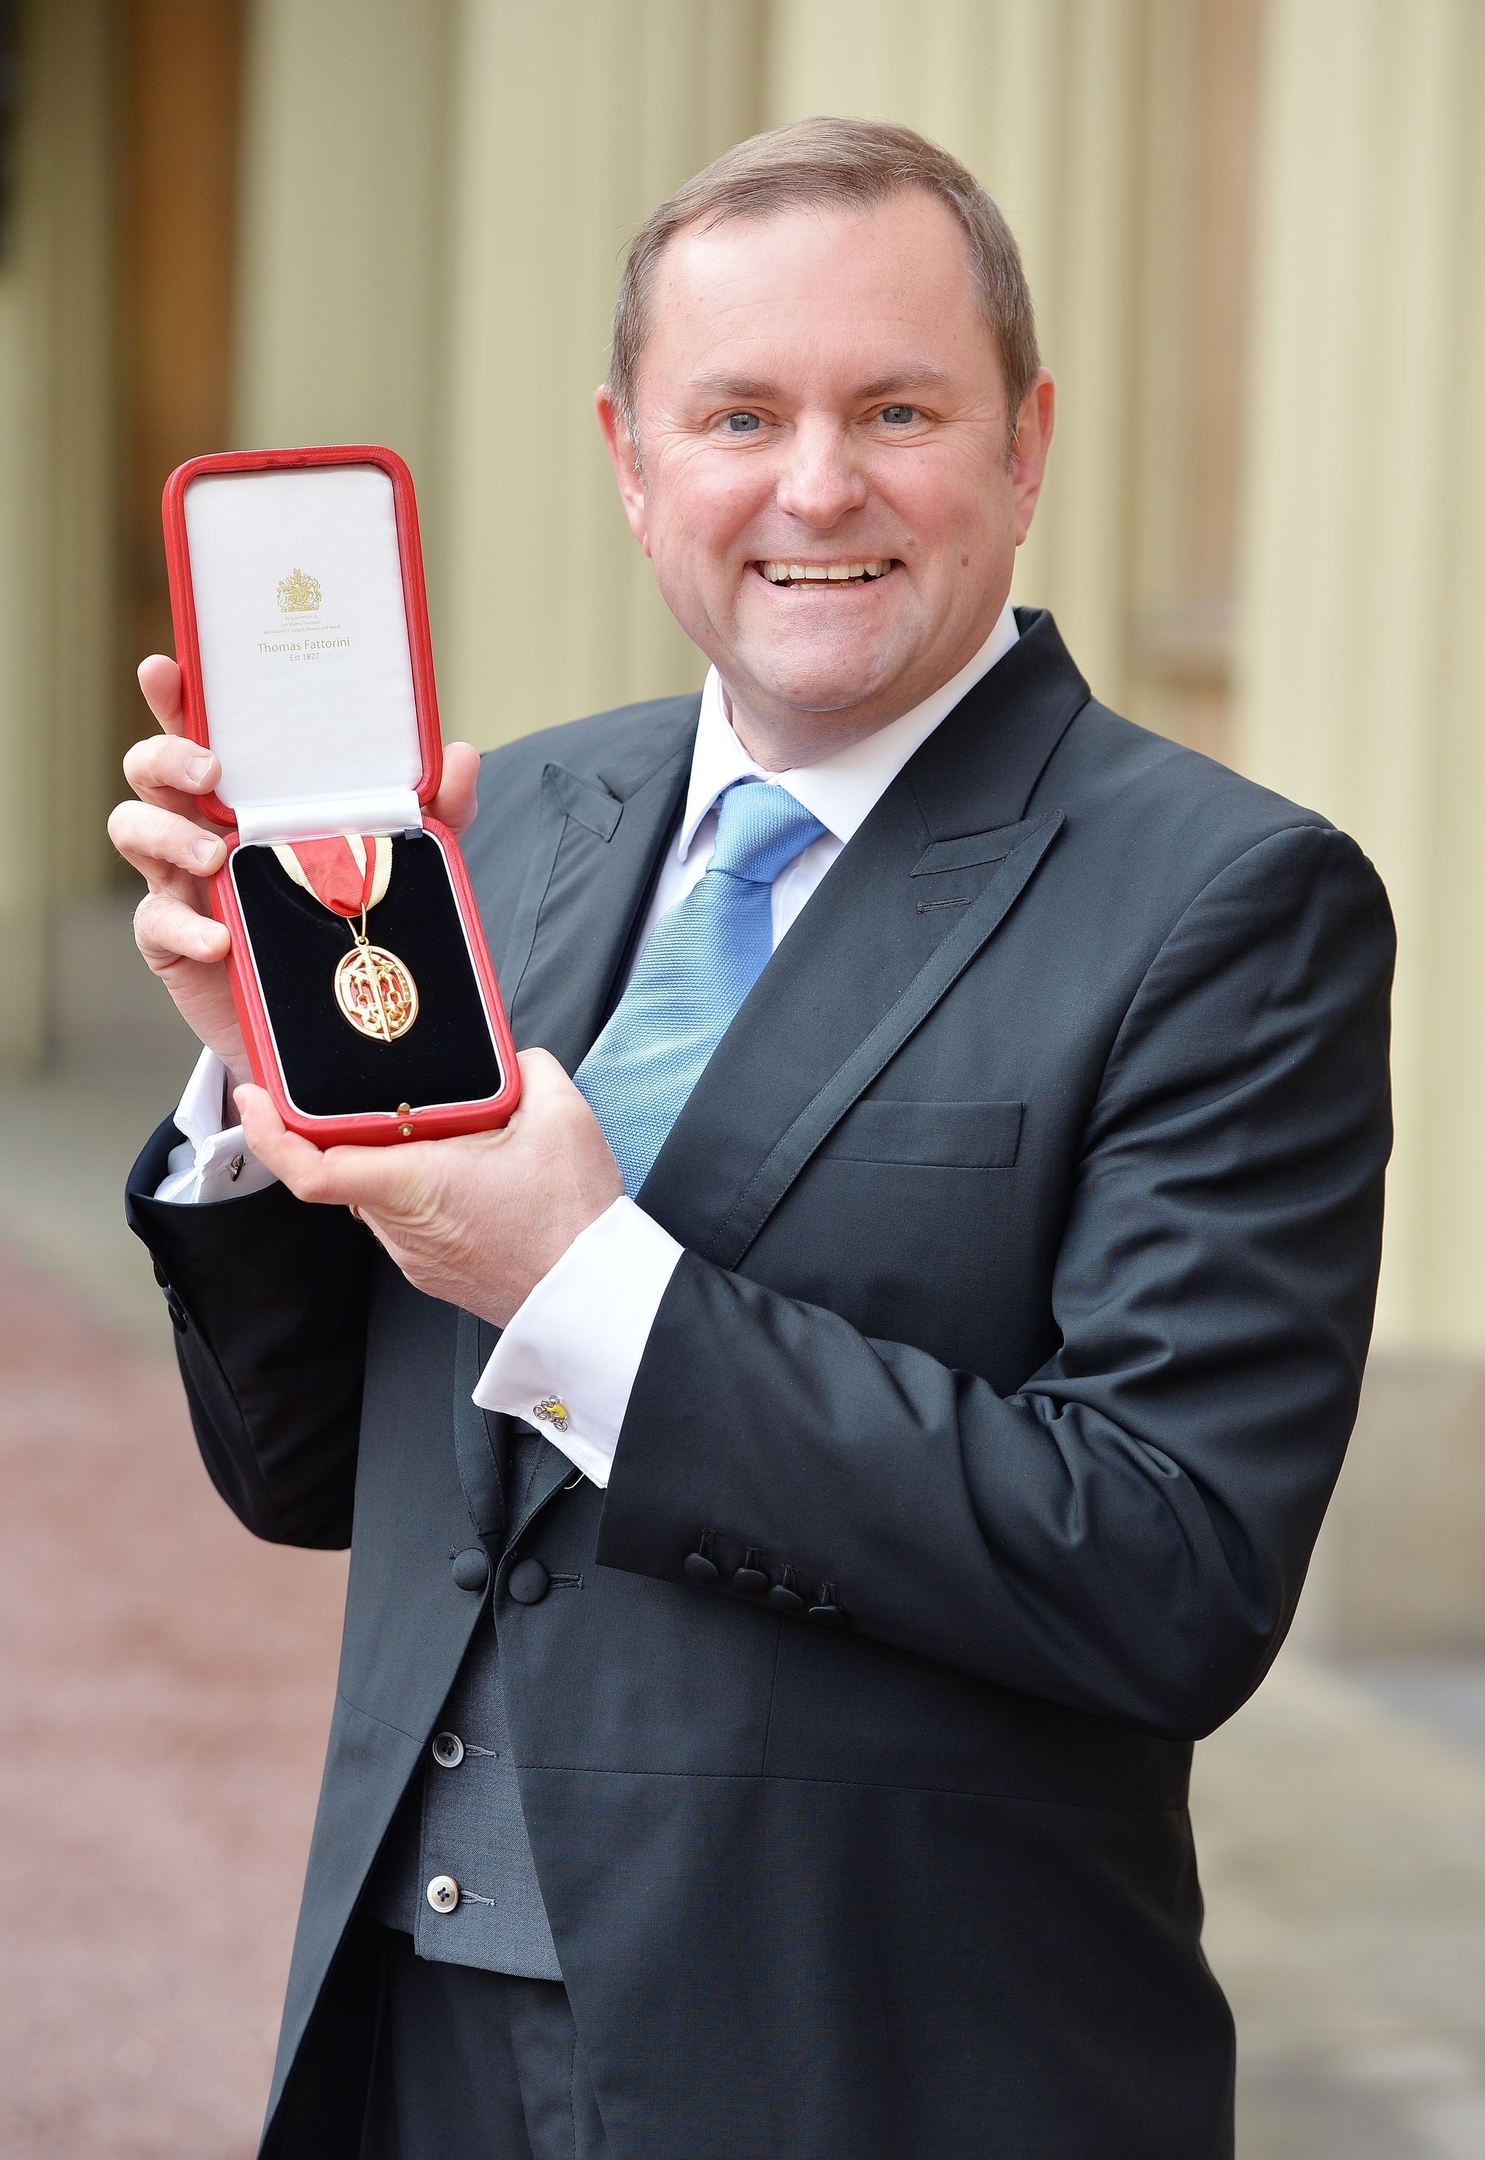 Sir Gary Verity holds his insignia of Knighthood which was presented by the Prince of Wales at the Investiture ceremony in Buckingham Palace, London. 